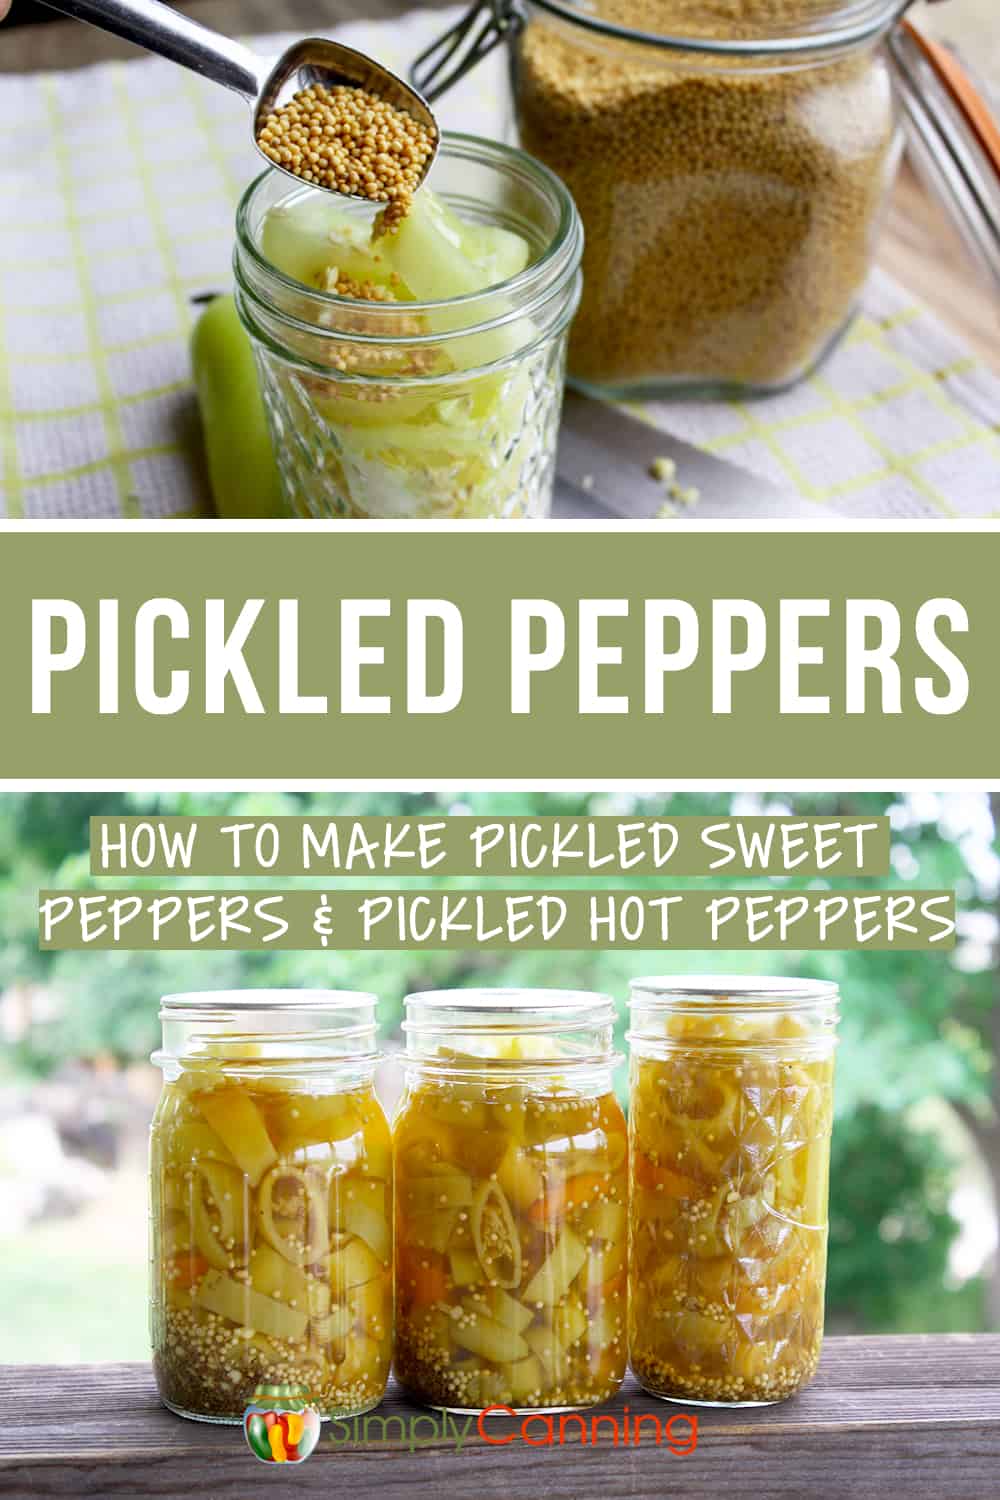 Pickled peppers can be made with just about any pepper out there!